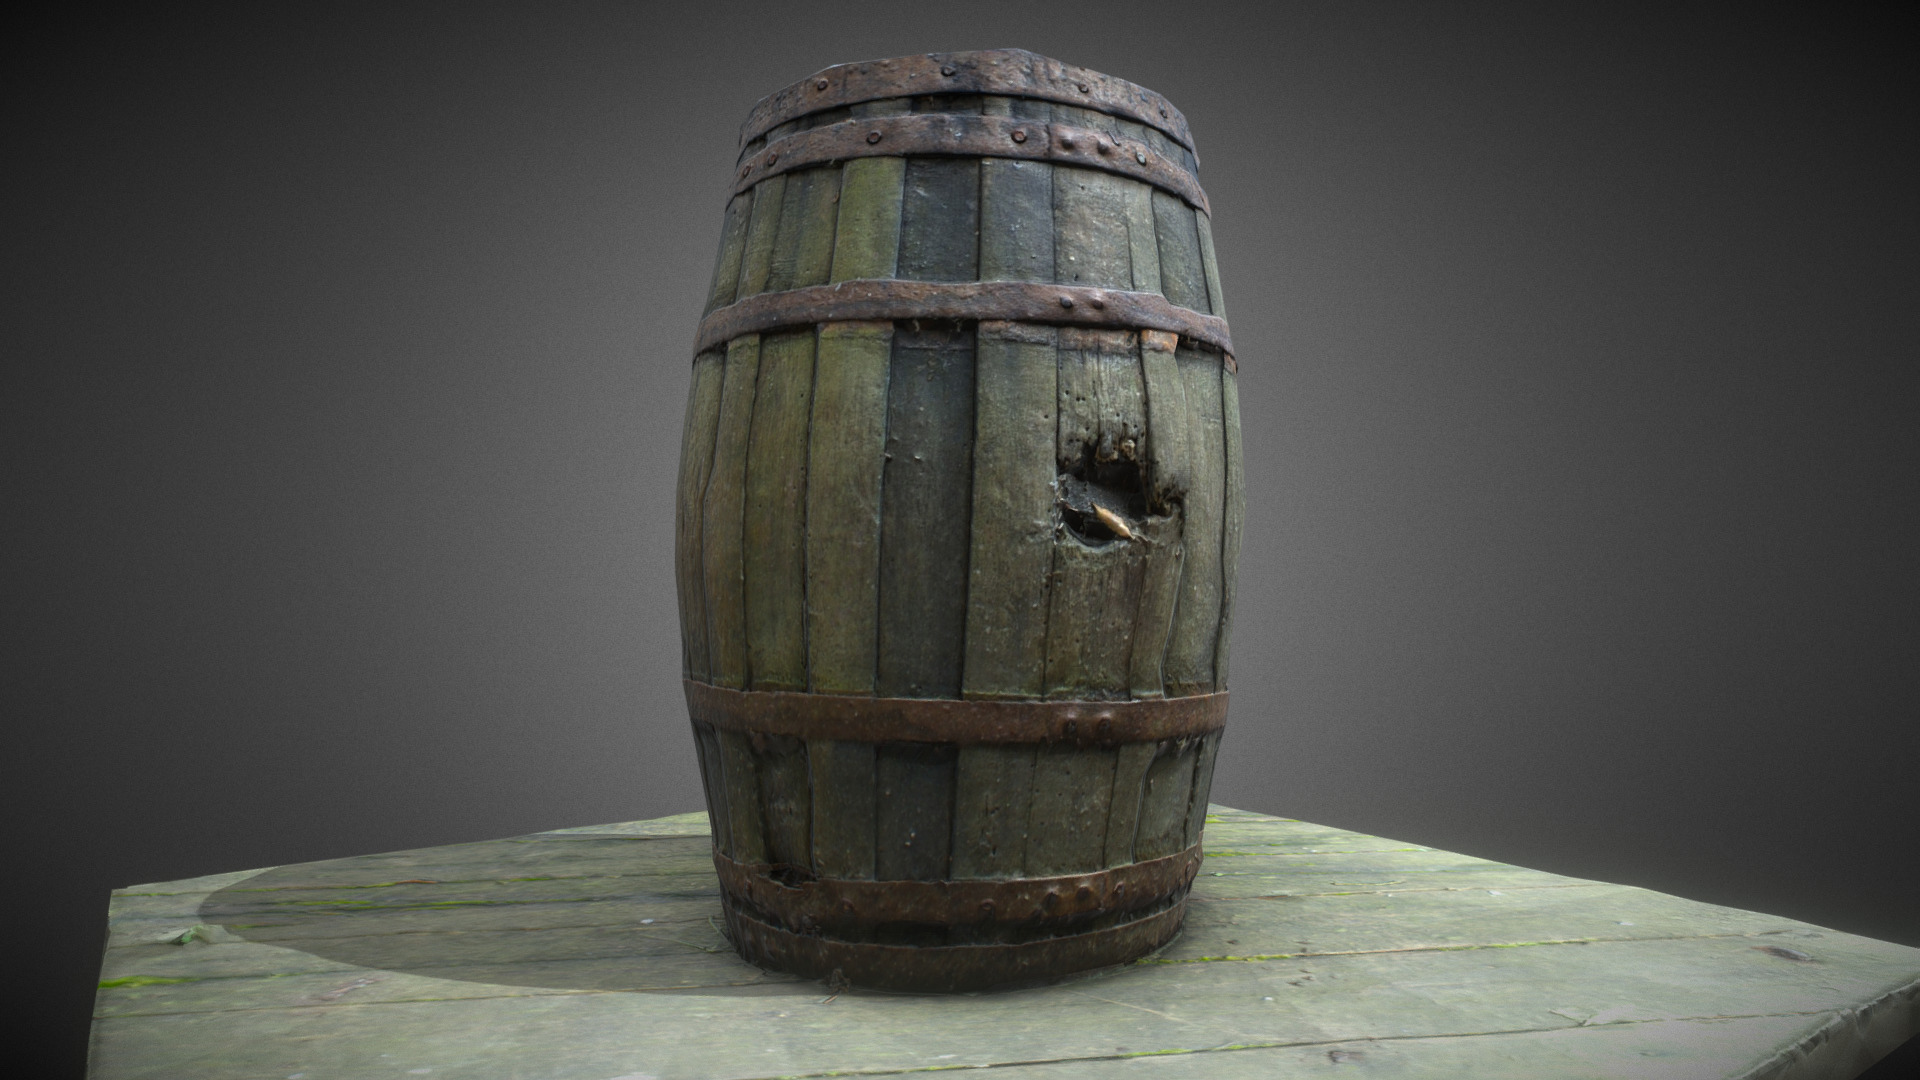 3D model Old Wood Barrel - This is a 3D model of the Old Wood Barrel. The 3D model is about a wooden barrel on a table.